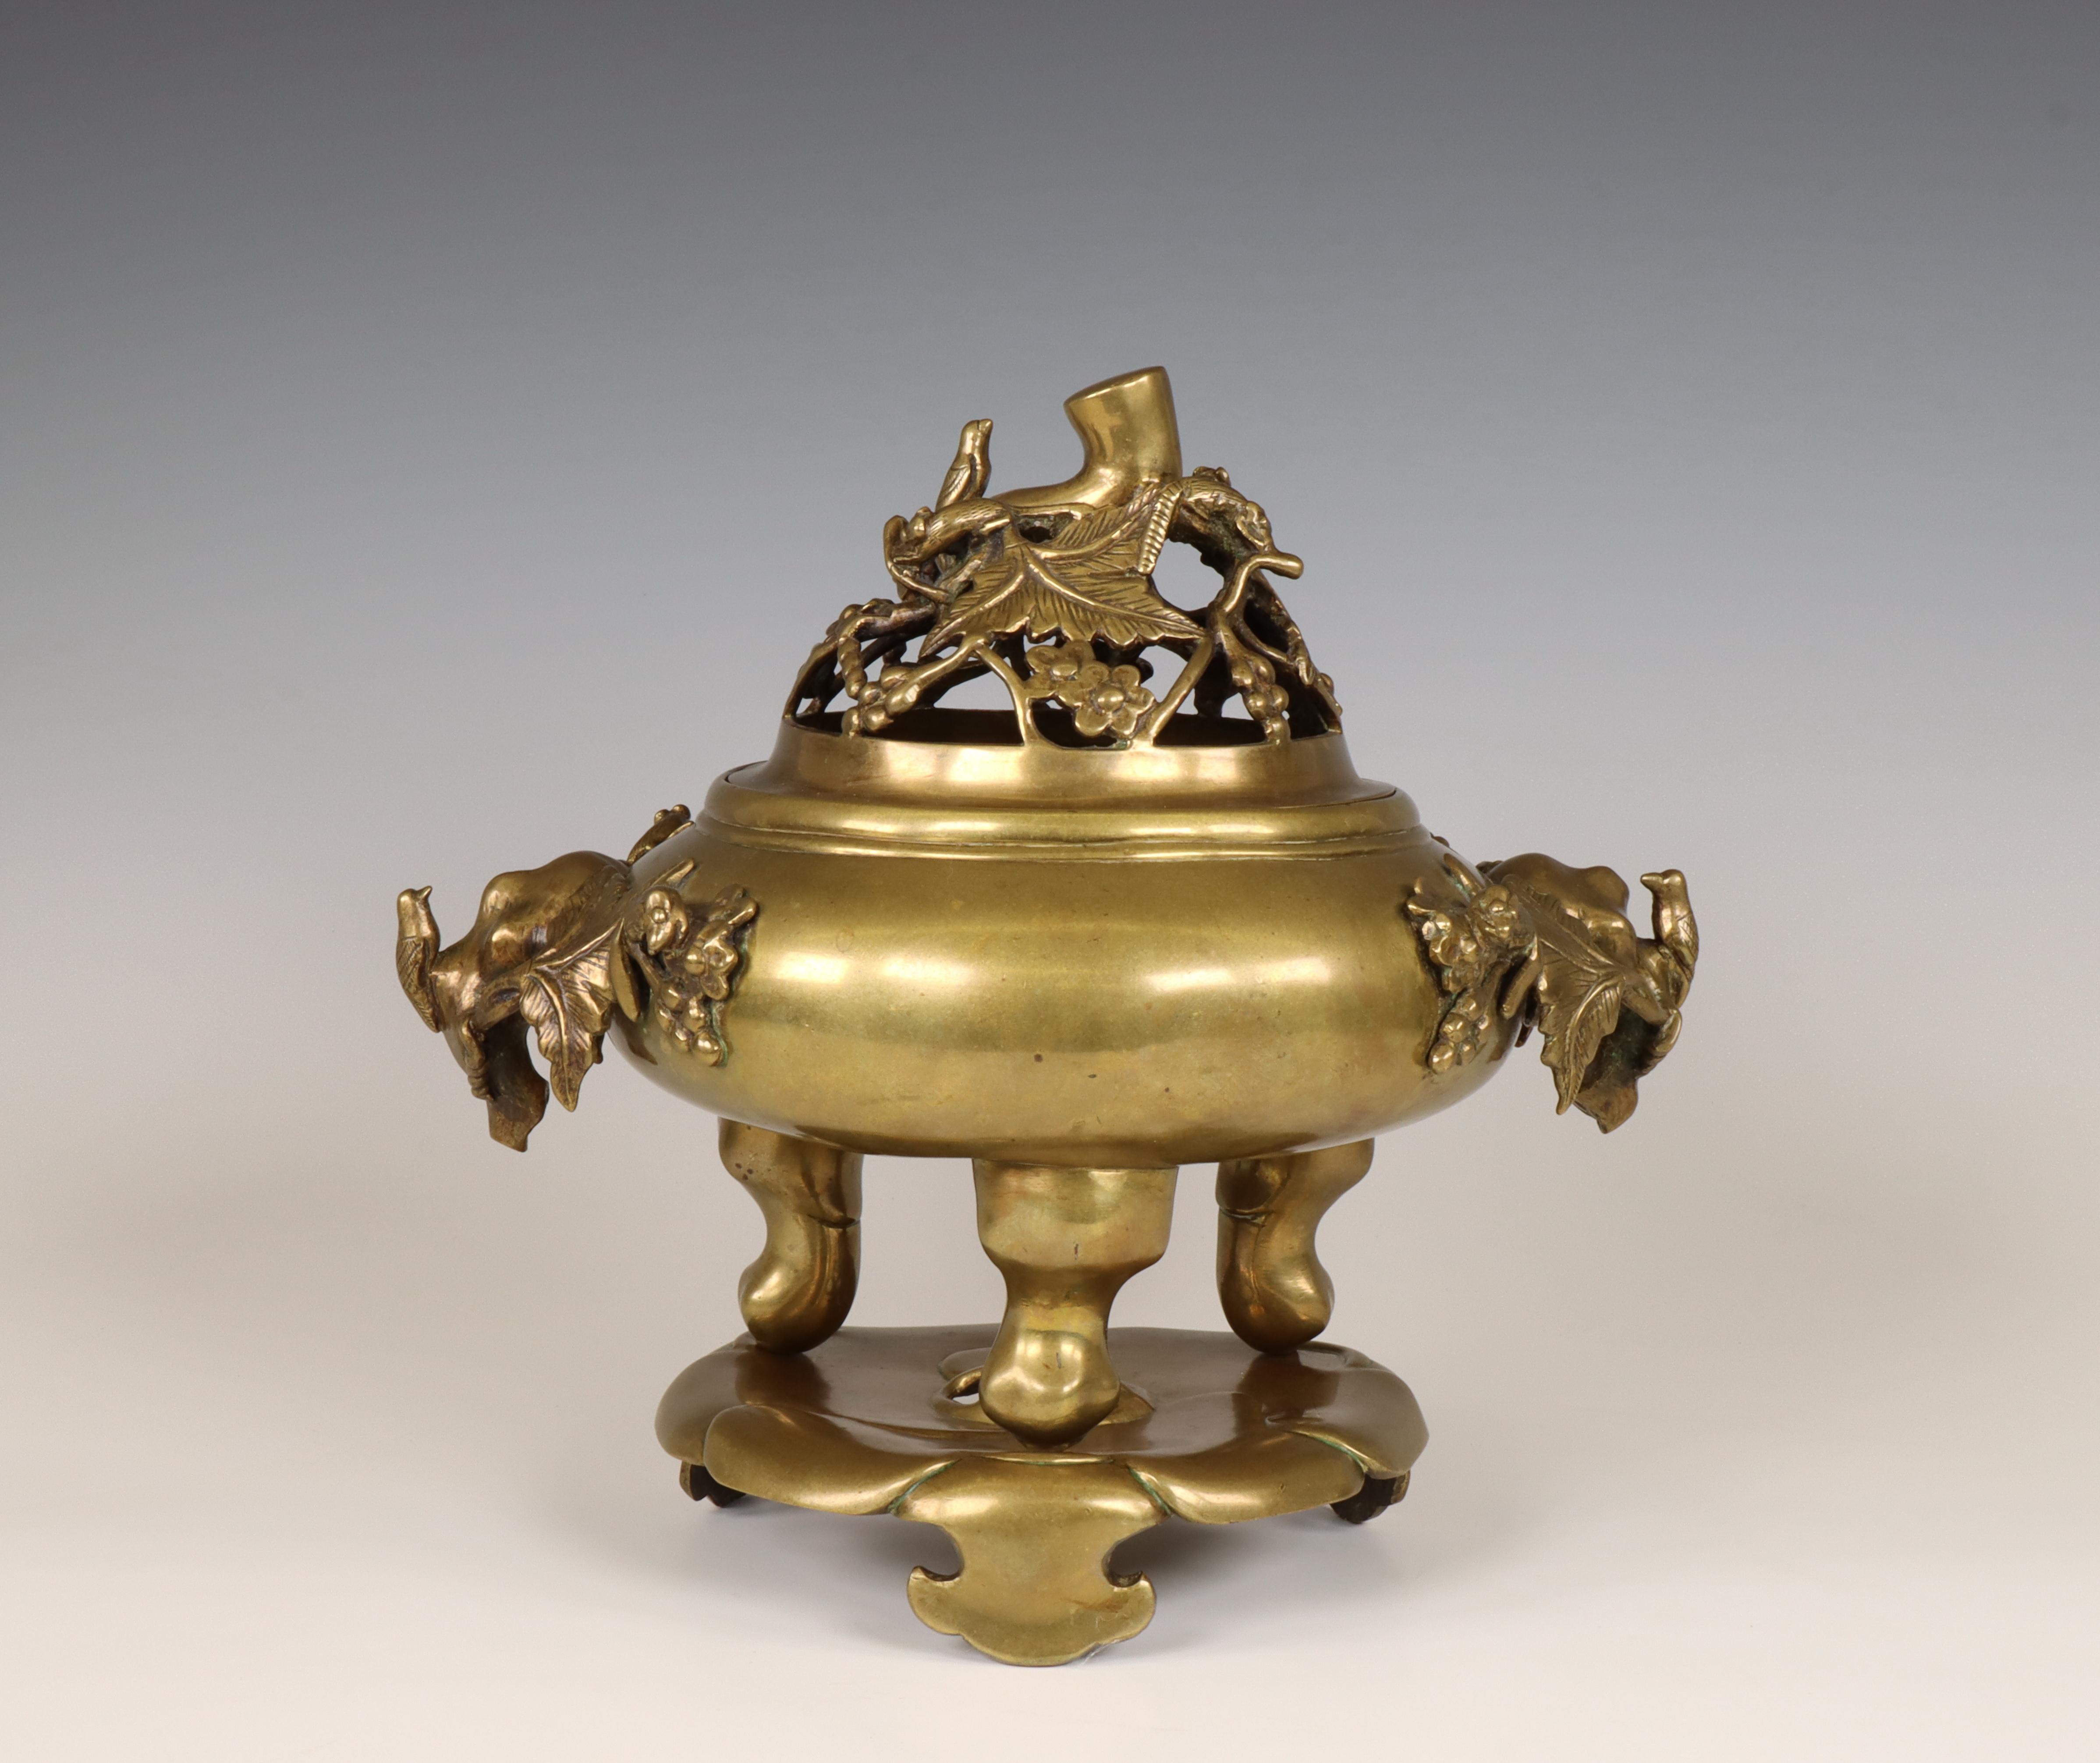 China, a bronze censer on stand, Qing dynasty, 19th century, - Image 2 of 6